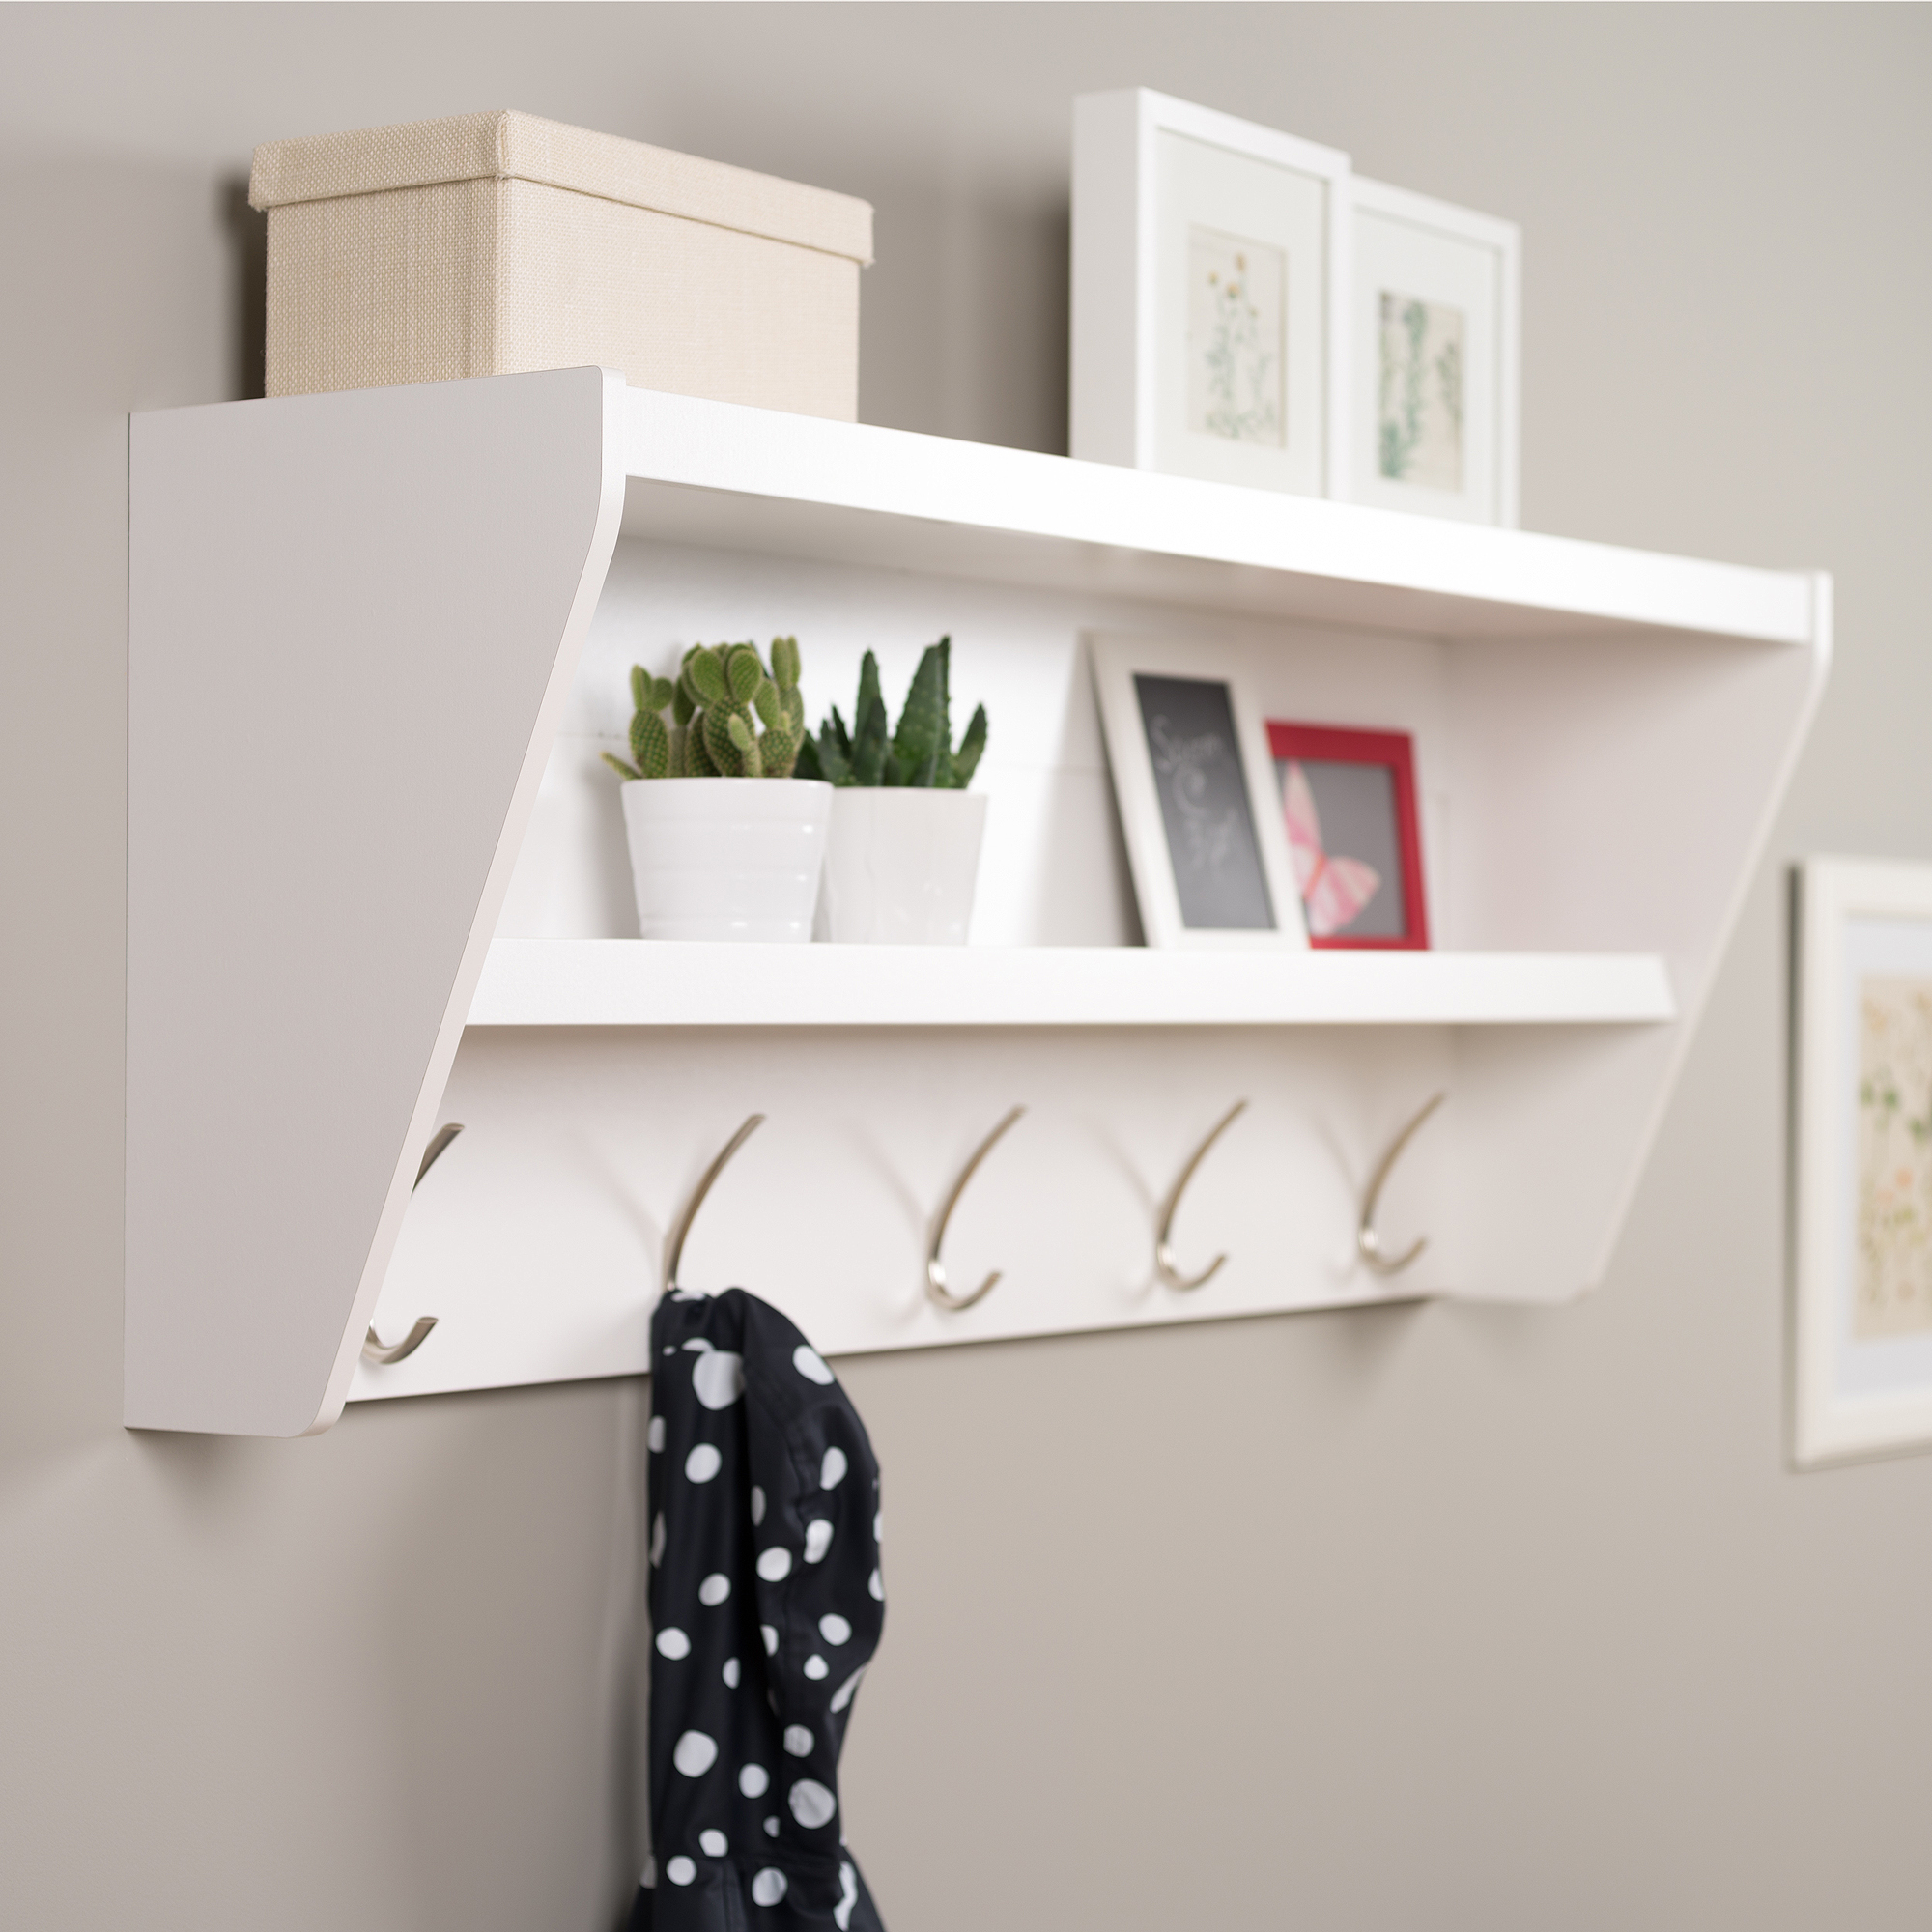 Wall Shelf With Hooks And Baskets Ideas On Foter